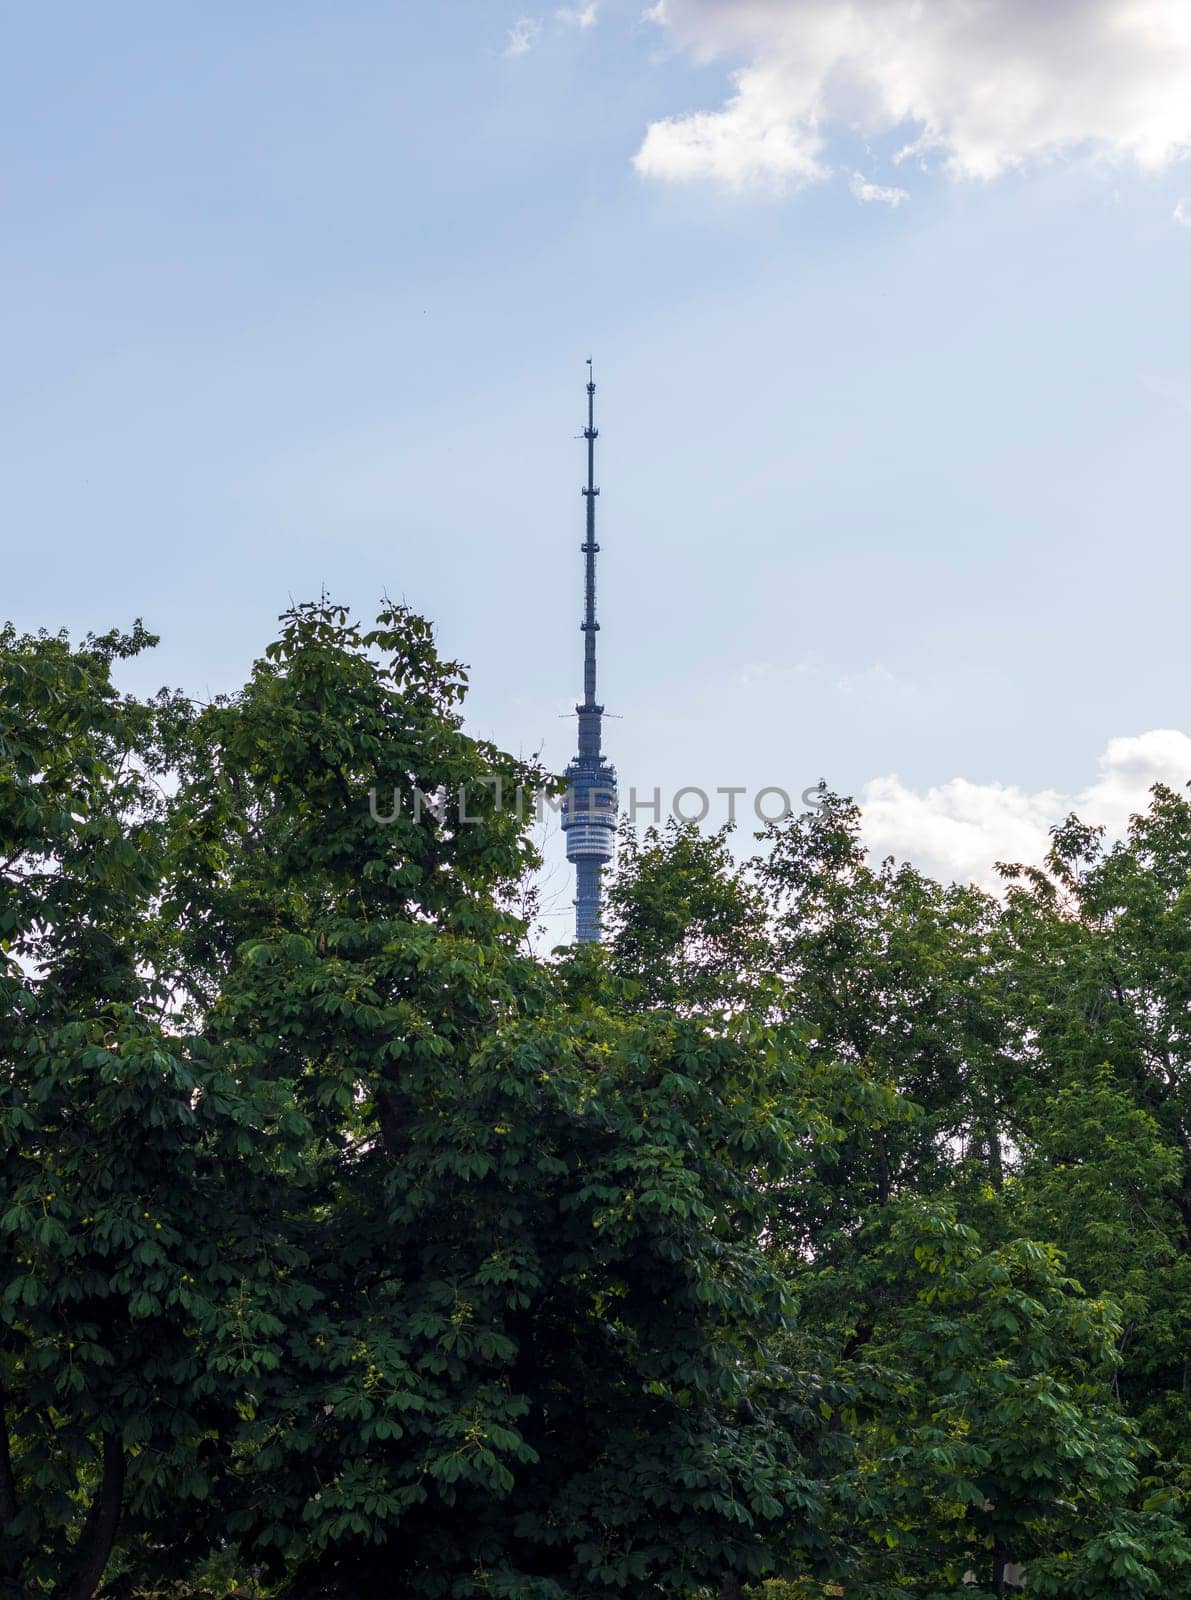 Shot of the television tower